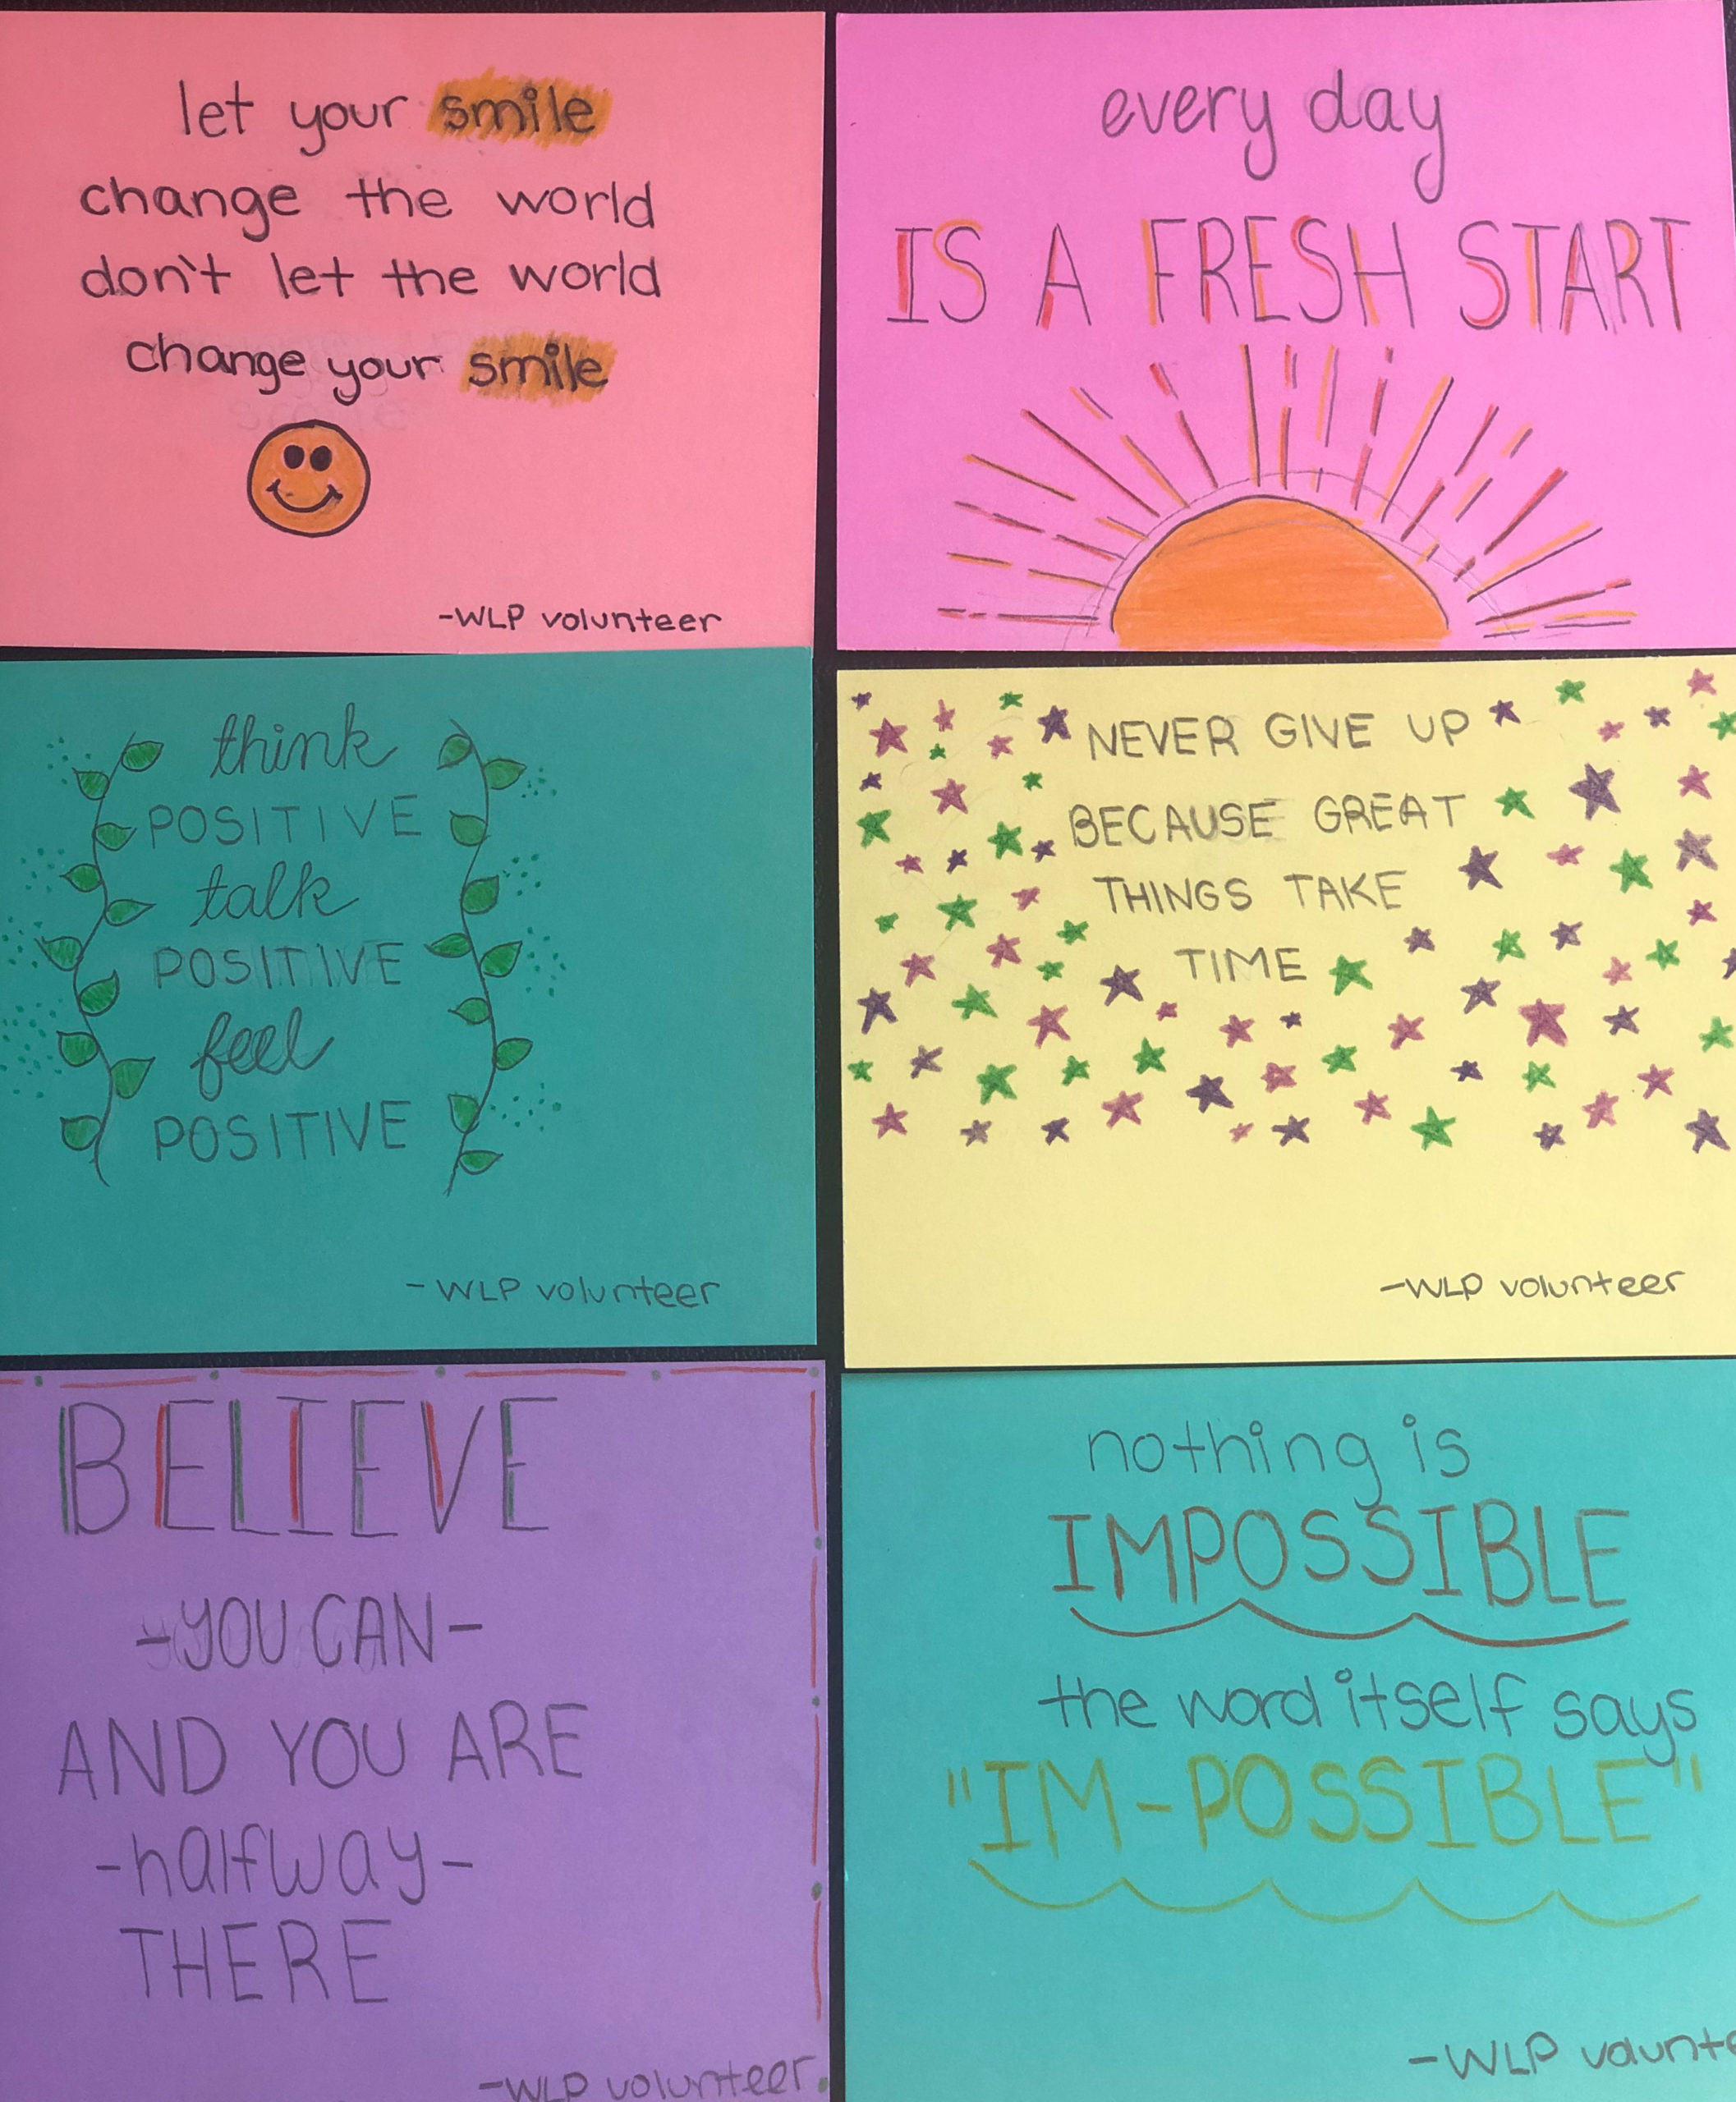 Making Inspirational Note Cards for Women's Lunch Place in Boston